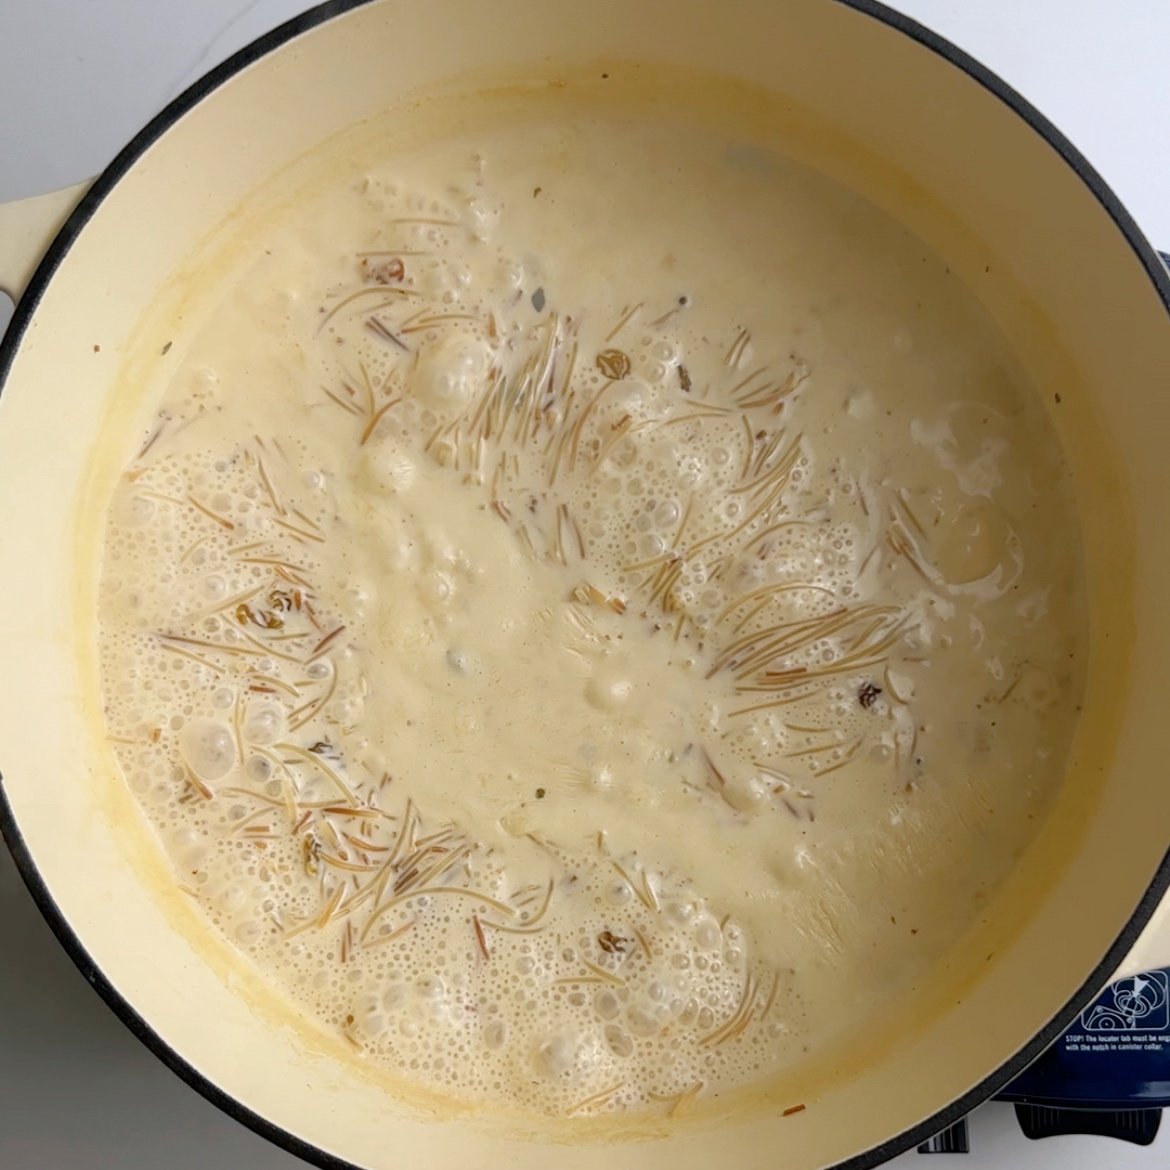 vermicelli noodles and milk boiling in a cream dutch oven